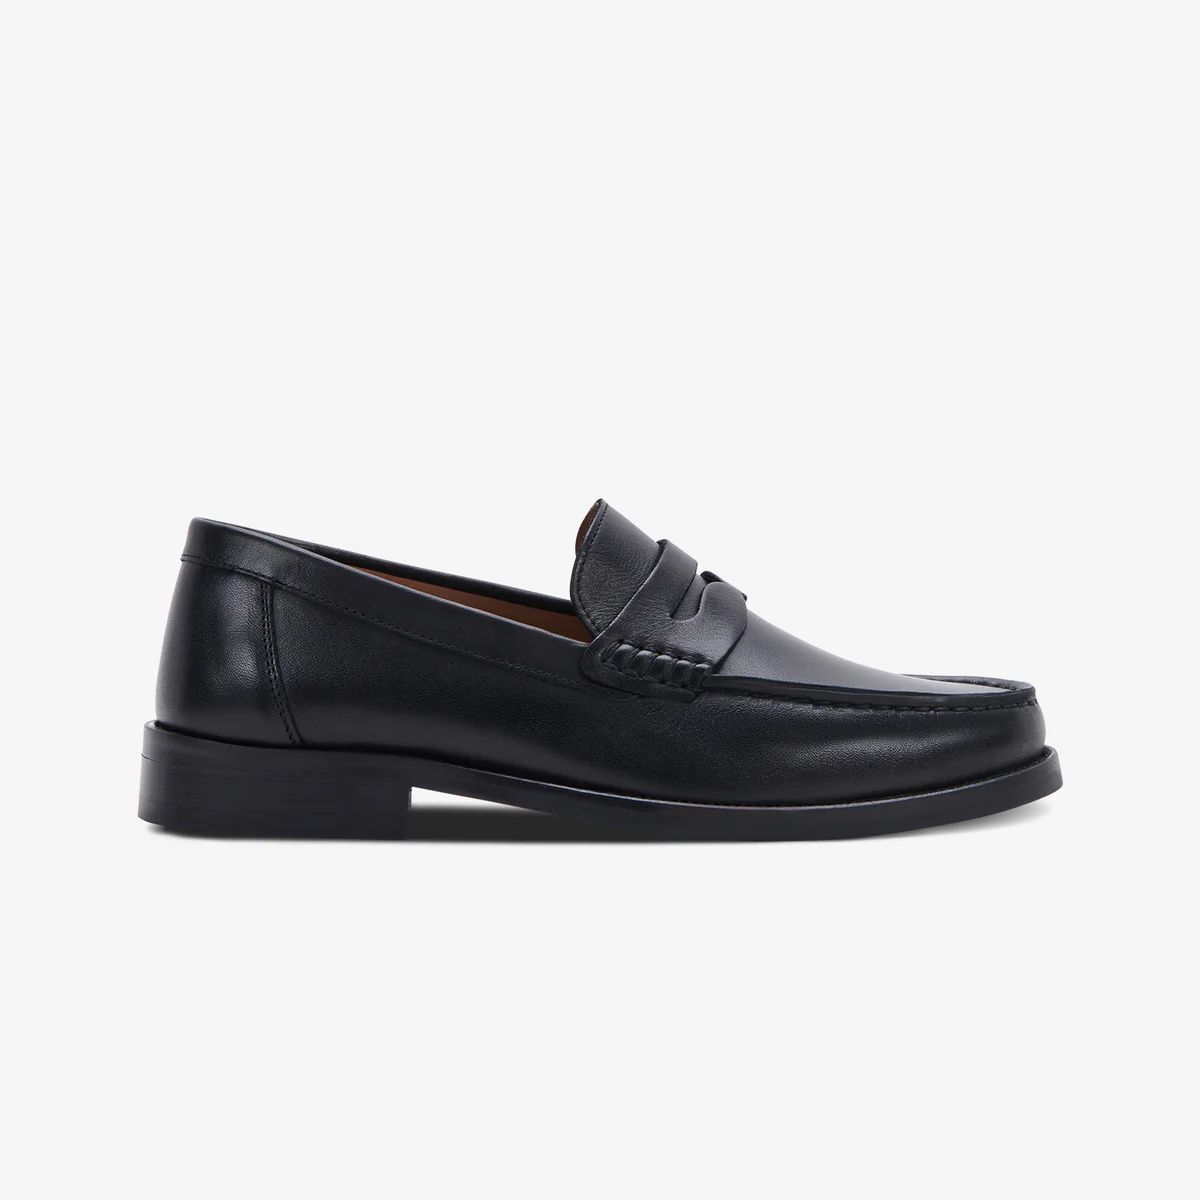 The Essex Penny Loafer - Nero | Greats.com